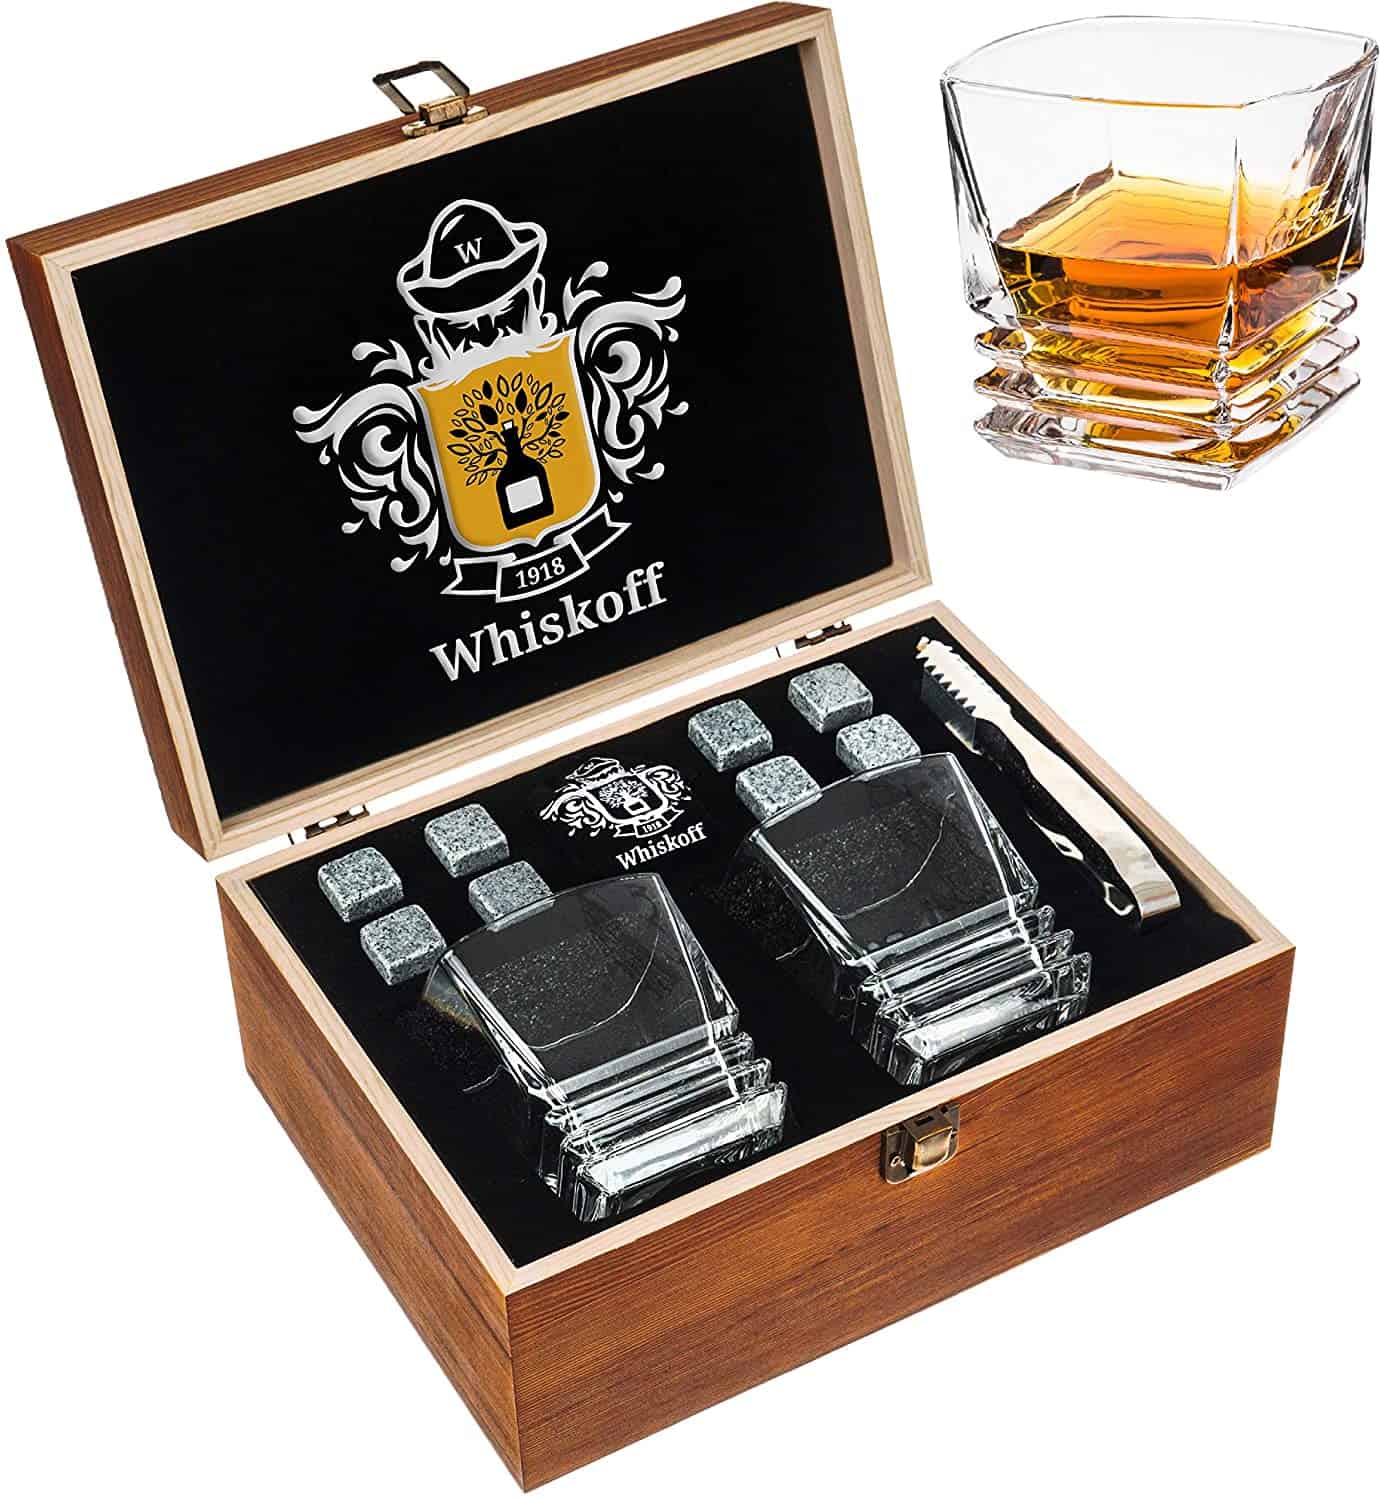 Whiskey Gift Set in a wooden box - retirement gifts for men